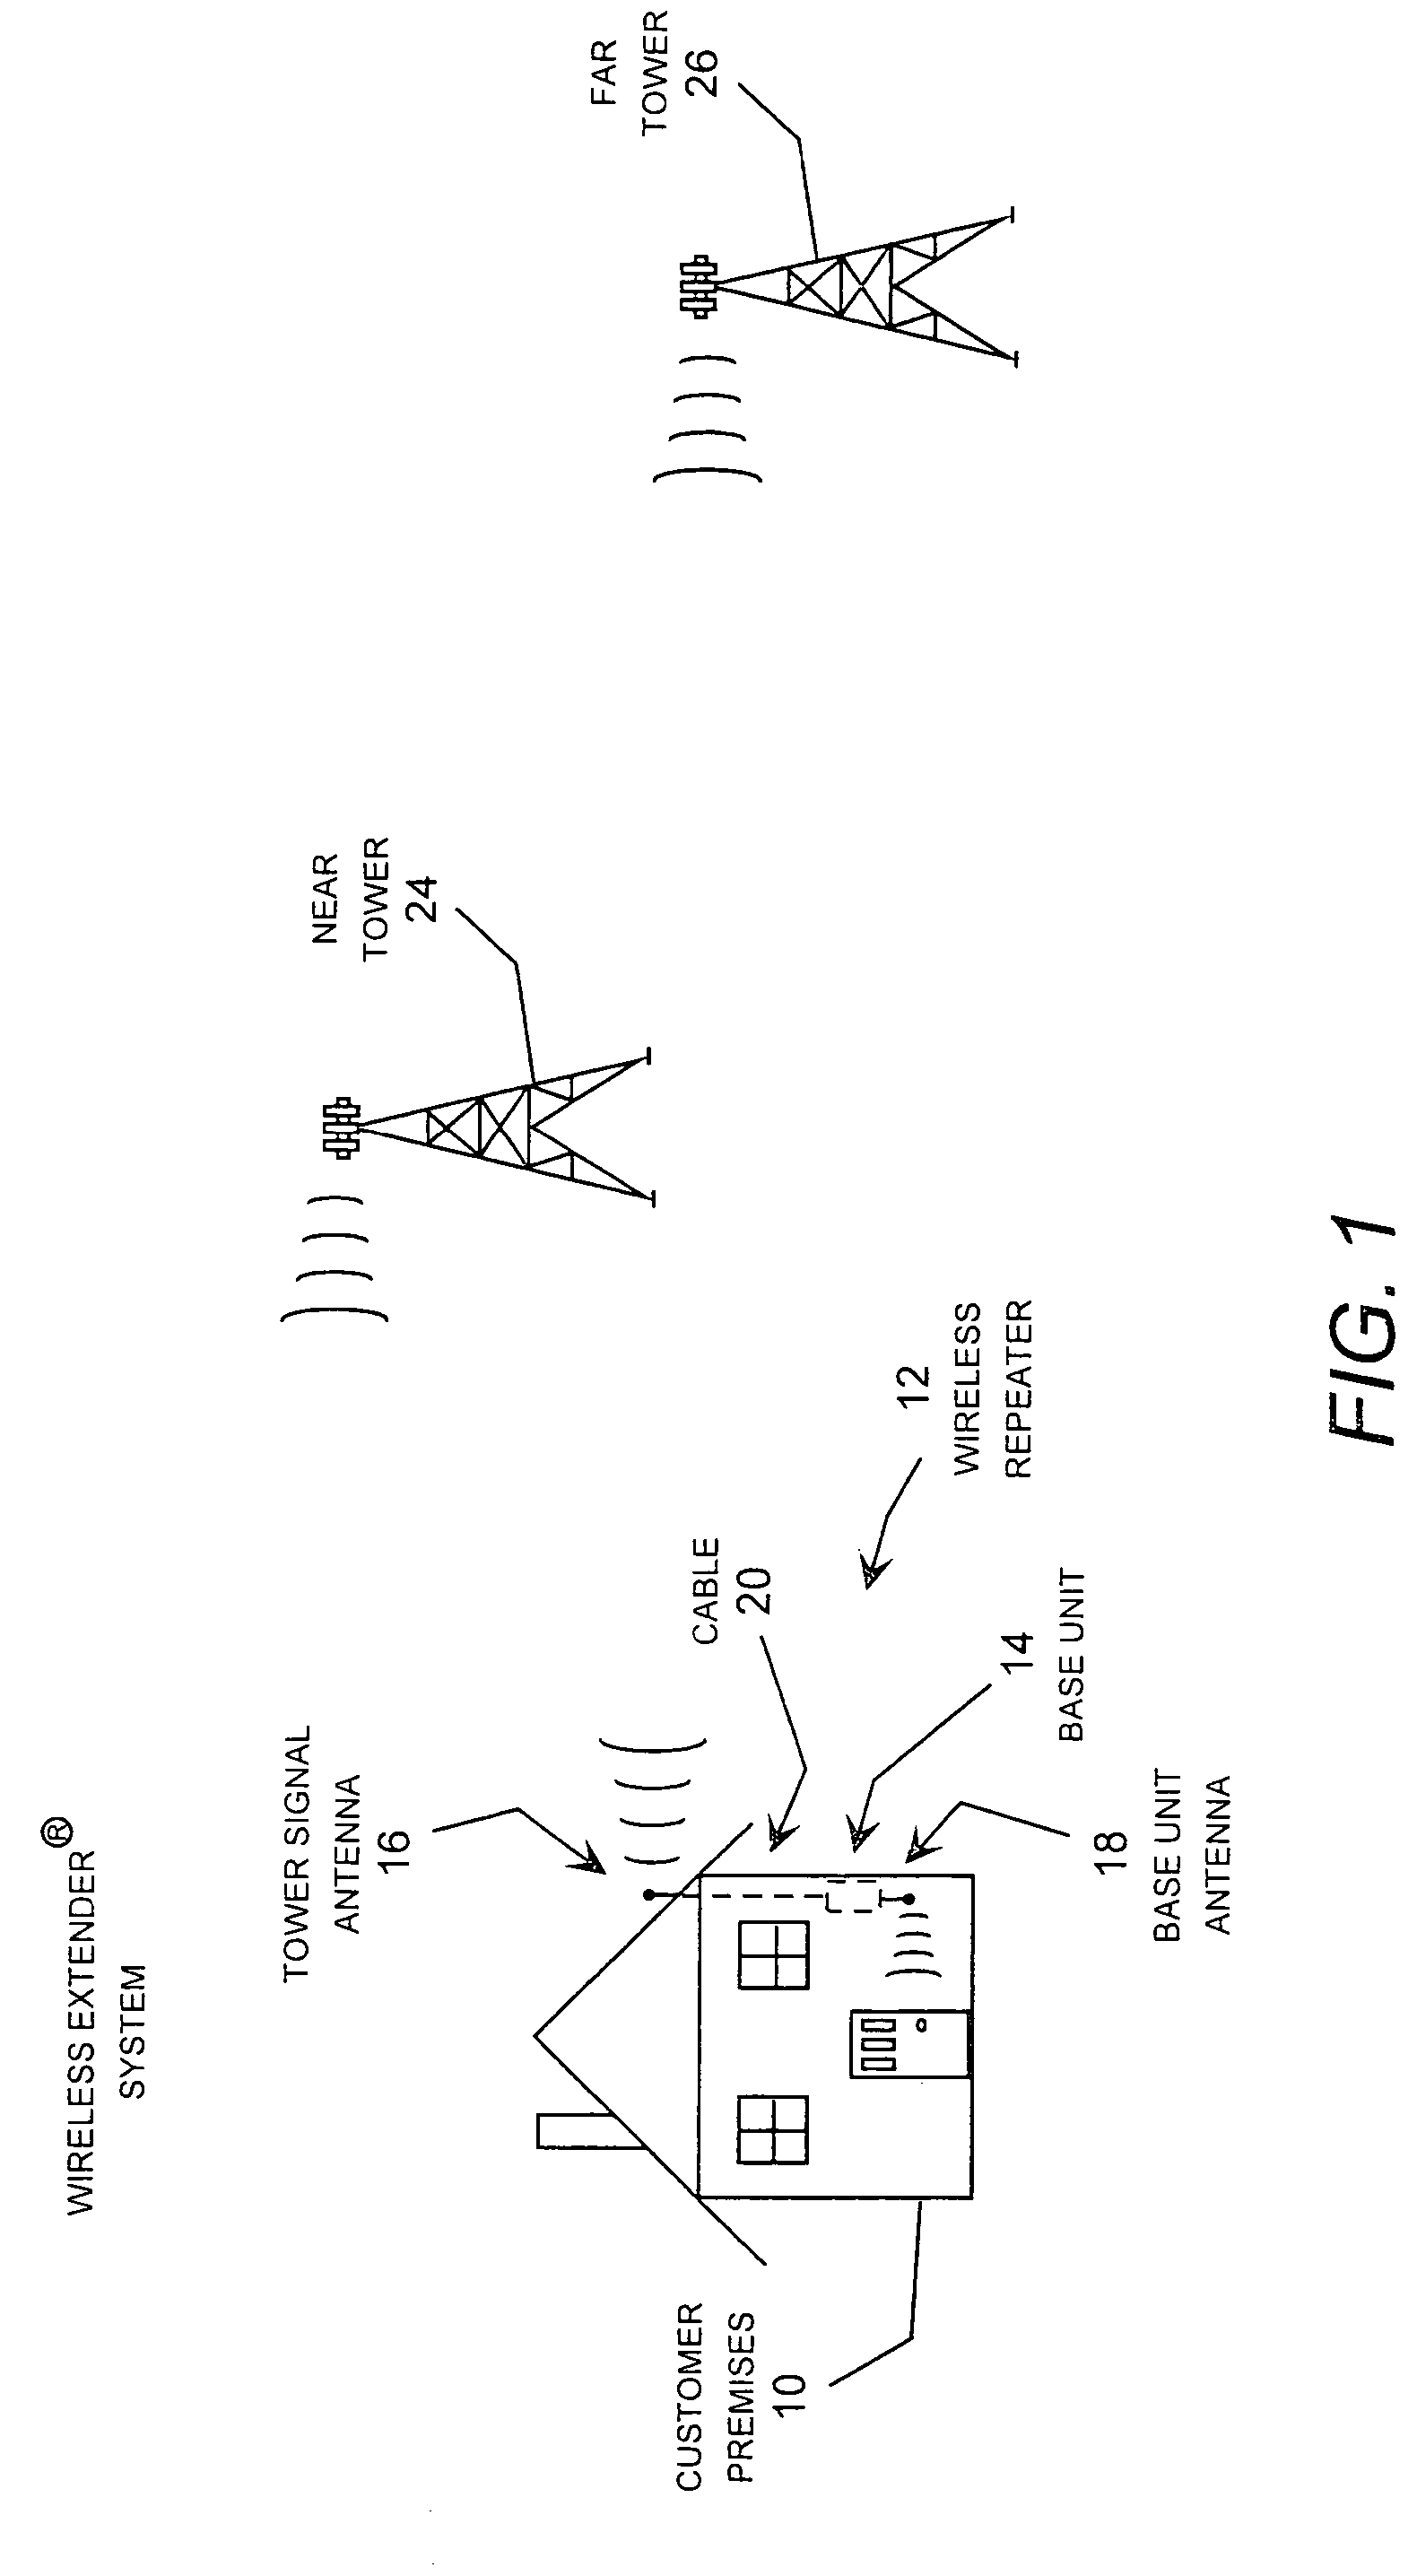 Wireless repeater implementing low-level oscillation detection and protection for a duplex communication system